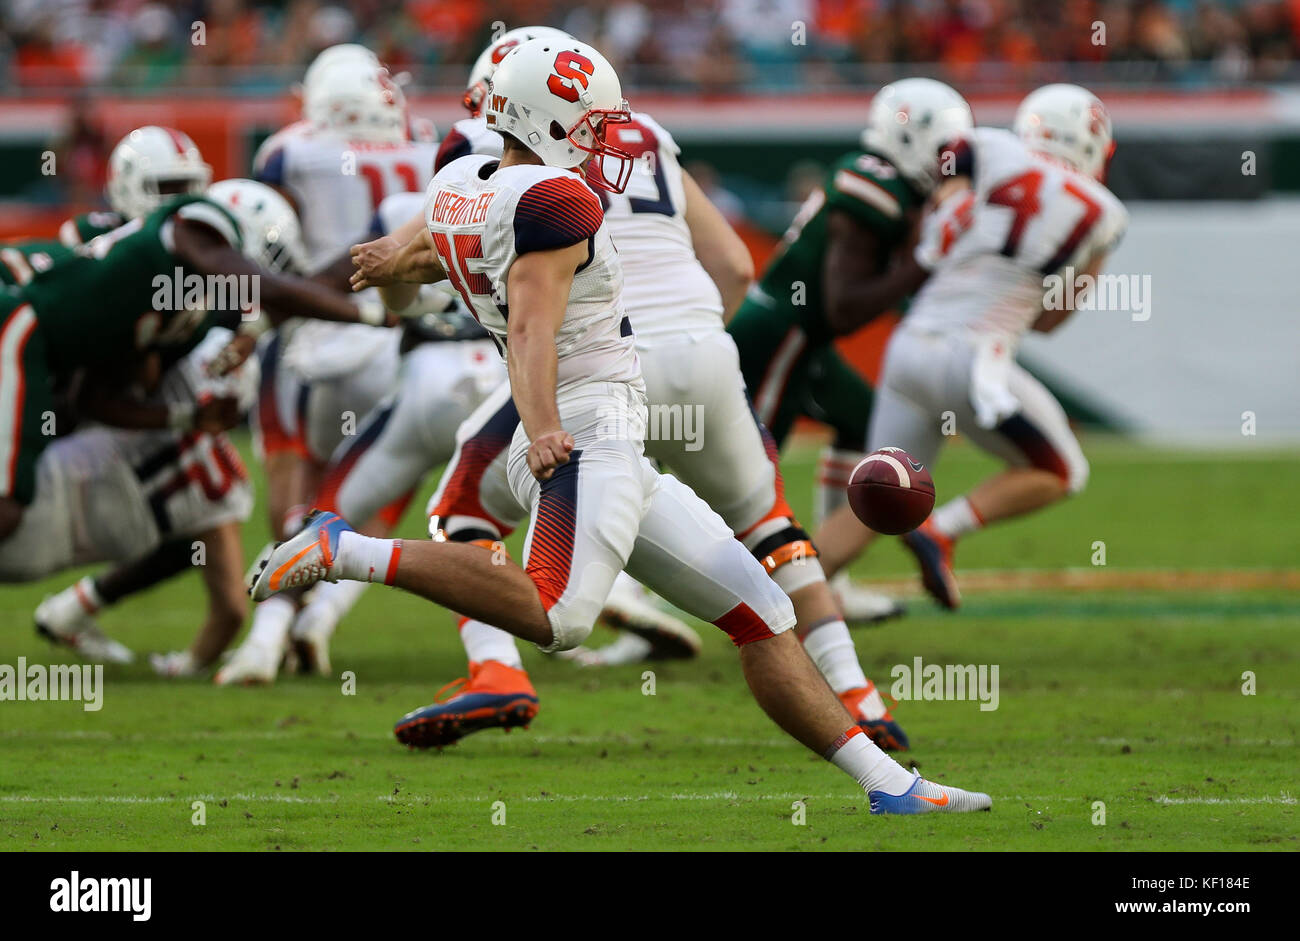 Miami Gardens, Florida, USA. 21st Oct, 2017. Syracuse Orange punter Sterling Hofrichter (35) in action during the college football game between Syracuse Orange and Miami Hurricanes at the Hard Rock Stadium in Miami Gardens, Florida. Miami won 27-19. Mario Houben/CSM/Alamy Live News Stock Photo